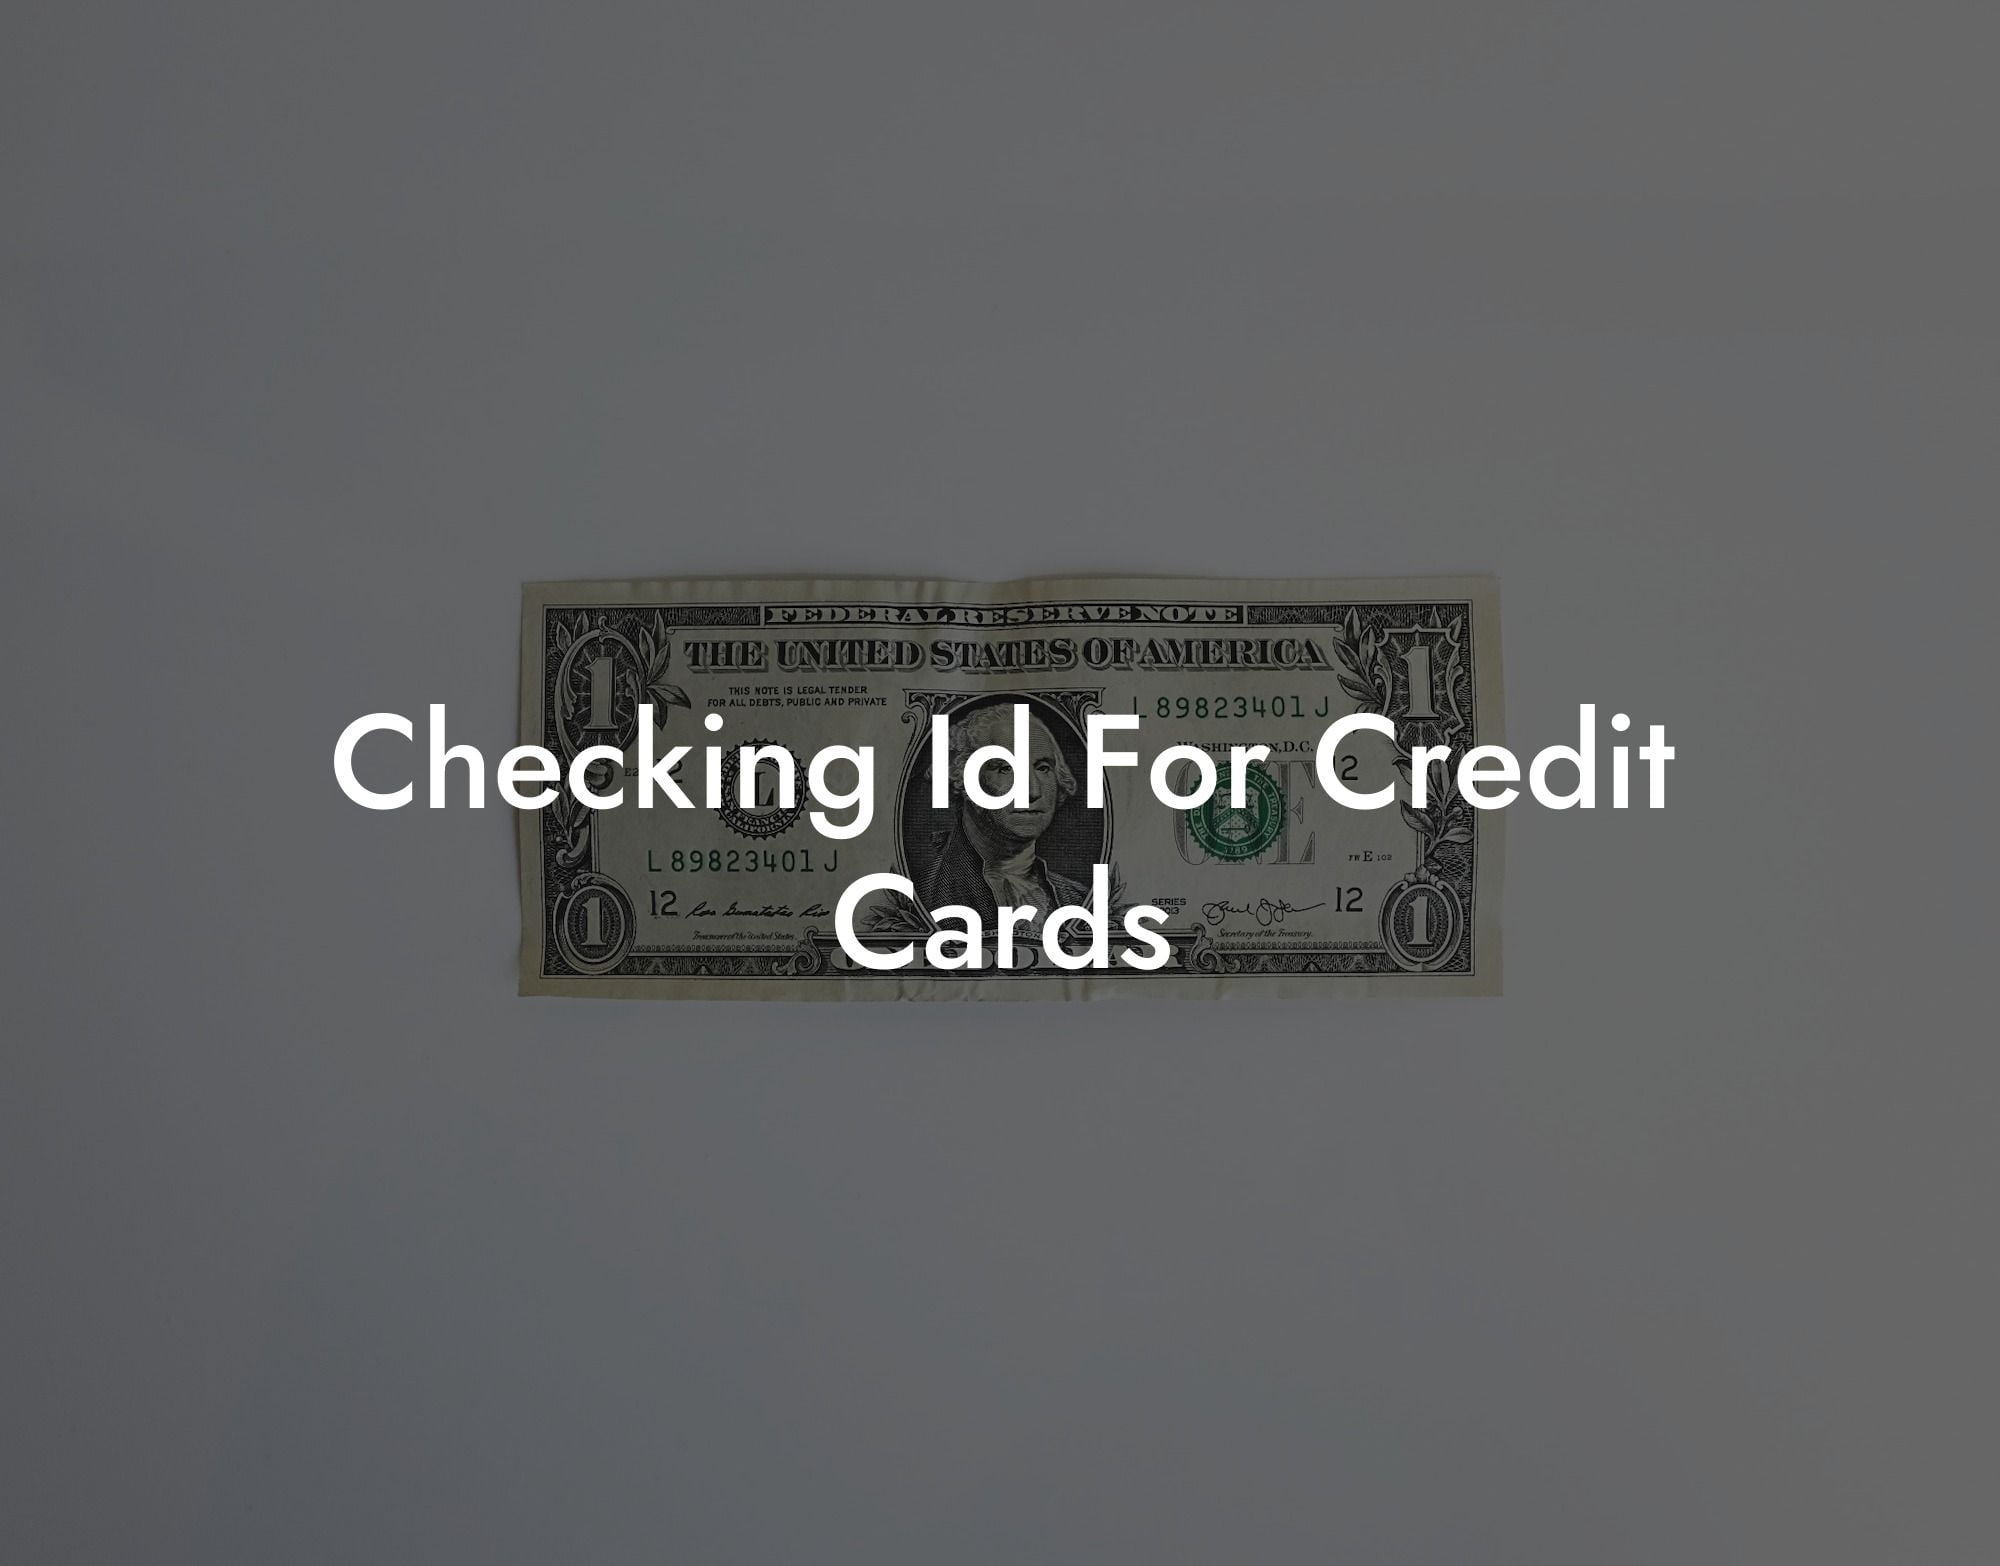 Checking Id For Credit Cards